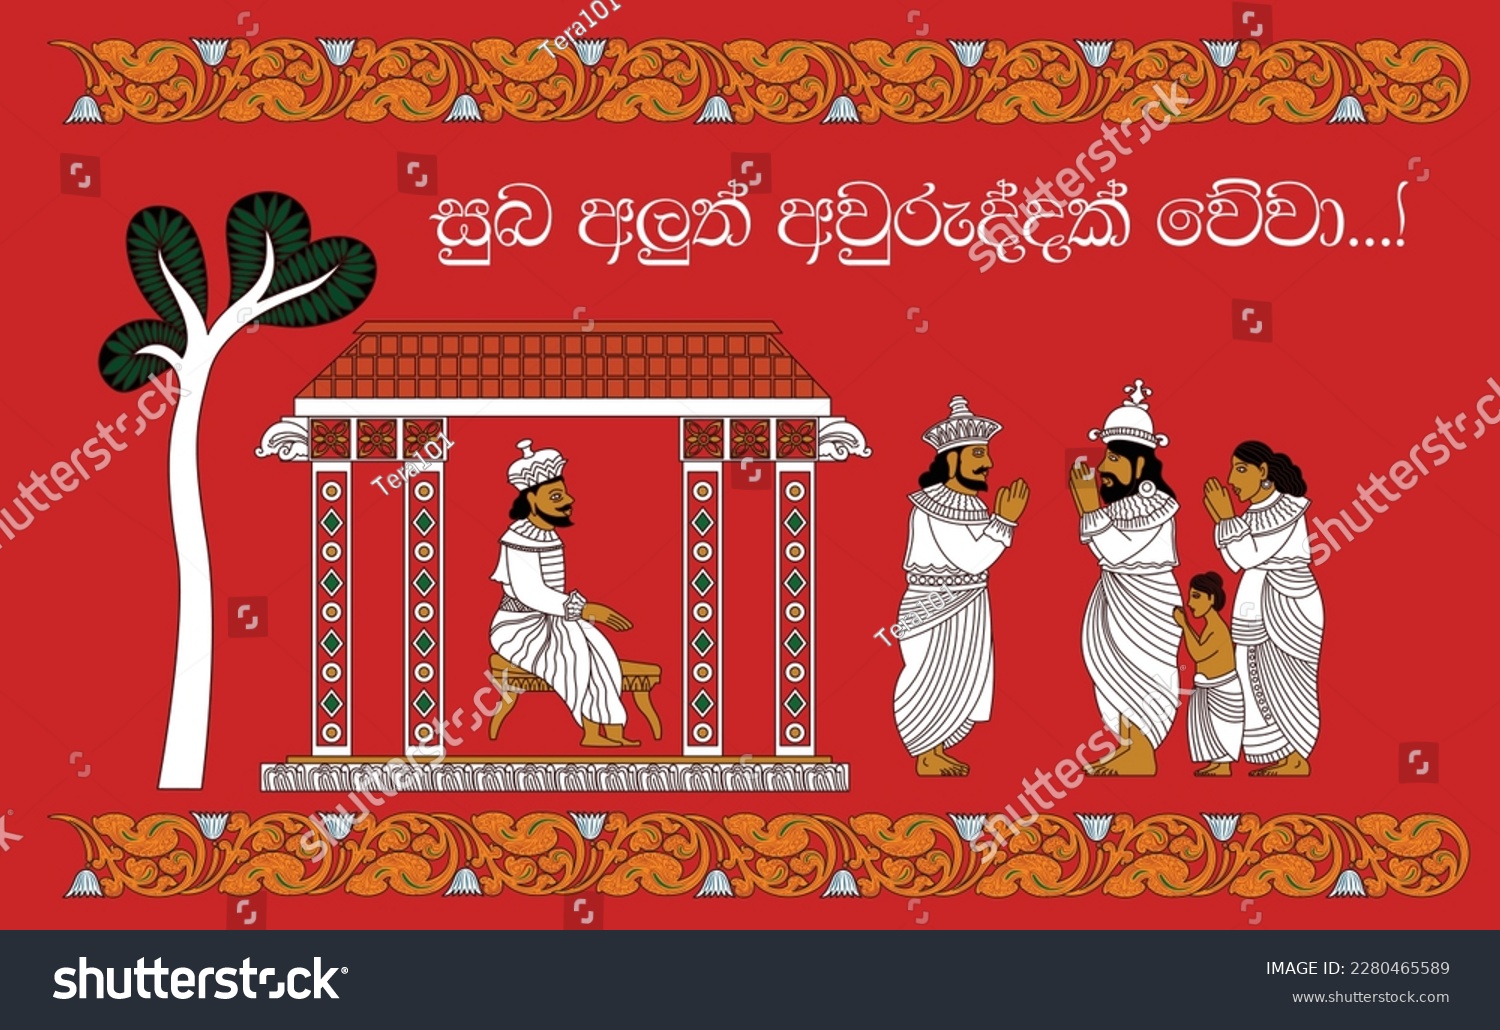 Sinhala and Tamil New Year wishes vector illustration poster #2280465589